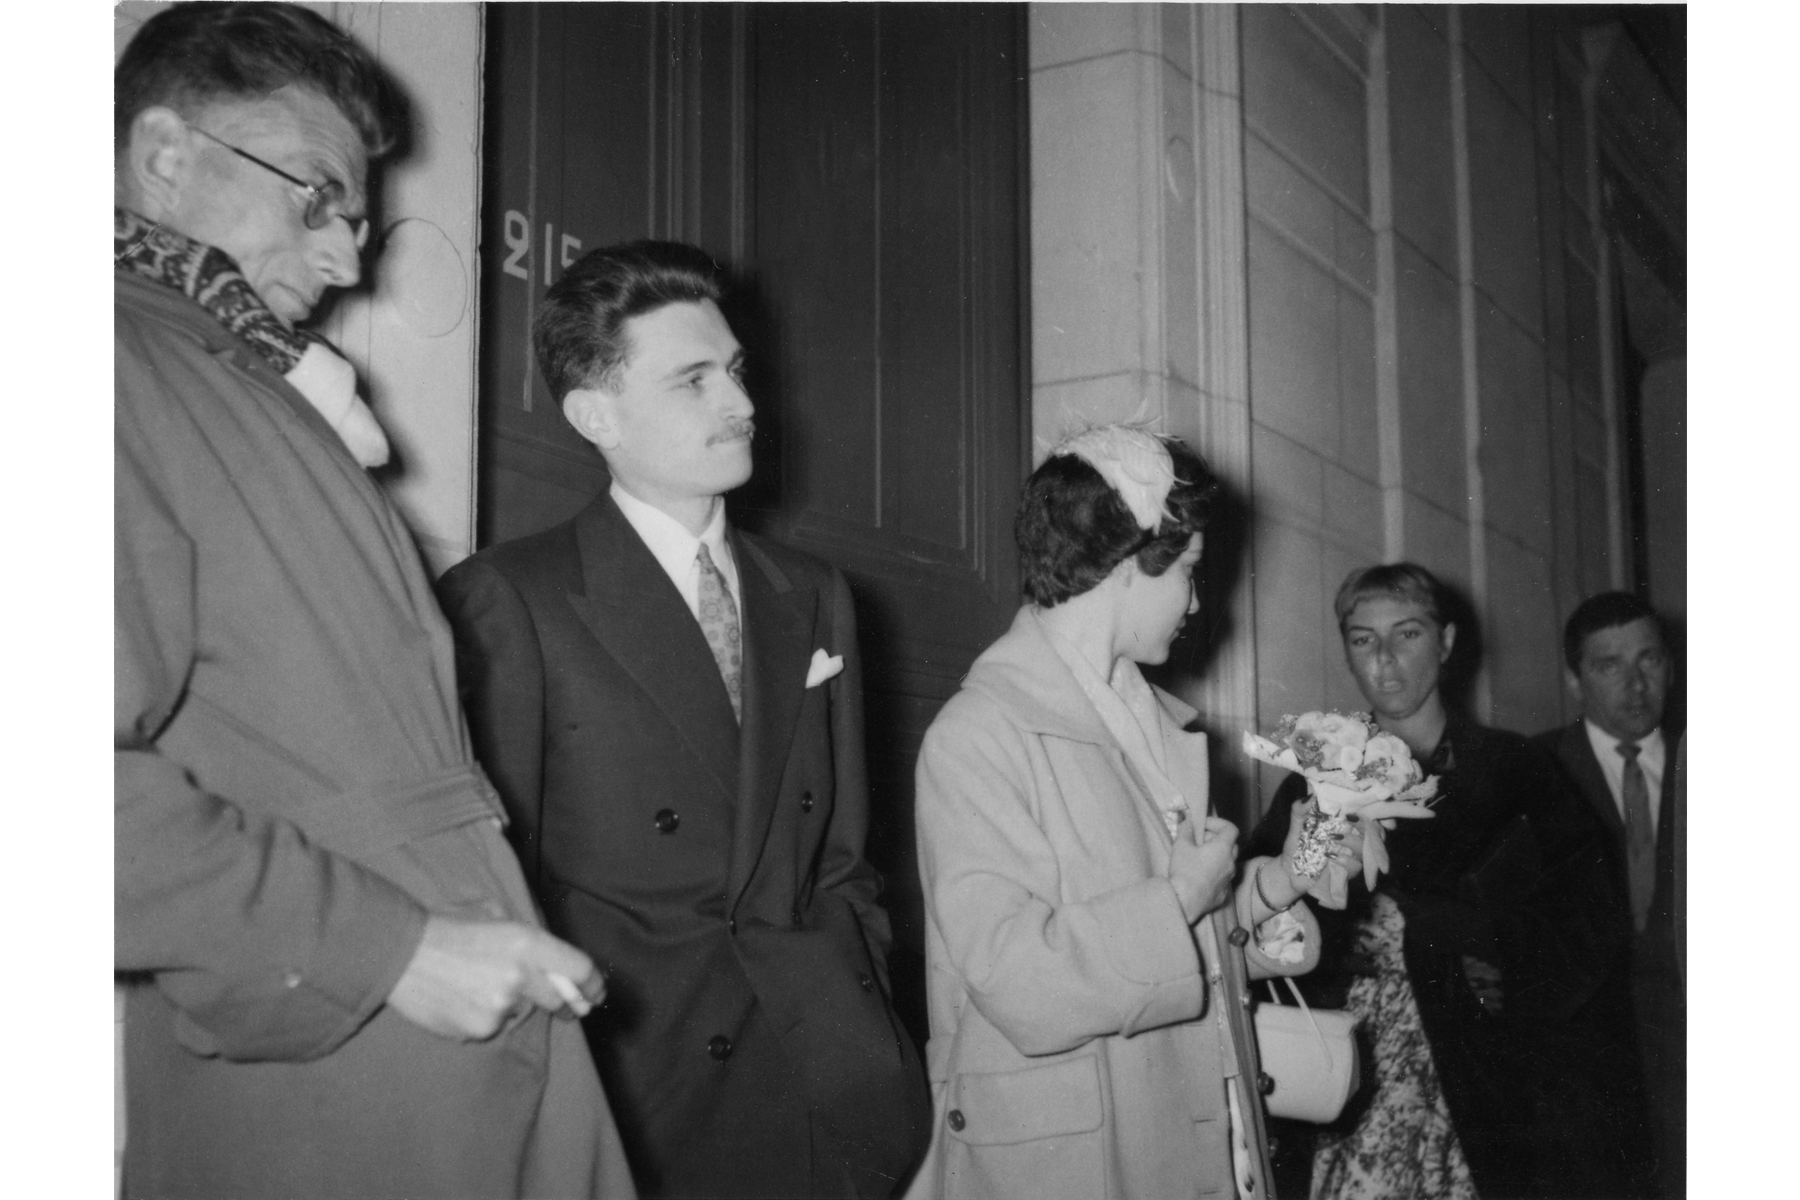 Photograph of Solange and Stephen James Joyce at their wedding, with Samuel Beckett (who was the Best Man) in the foreground, Image © Sean Sweeney, reproduced with his kind permission